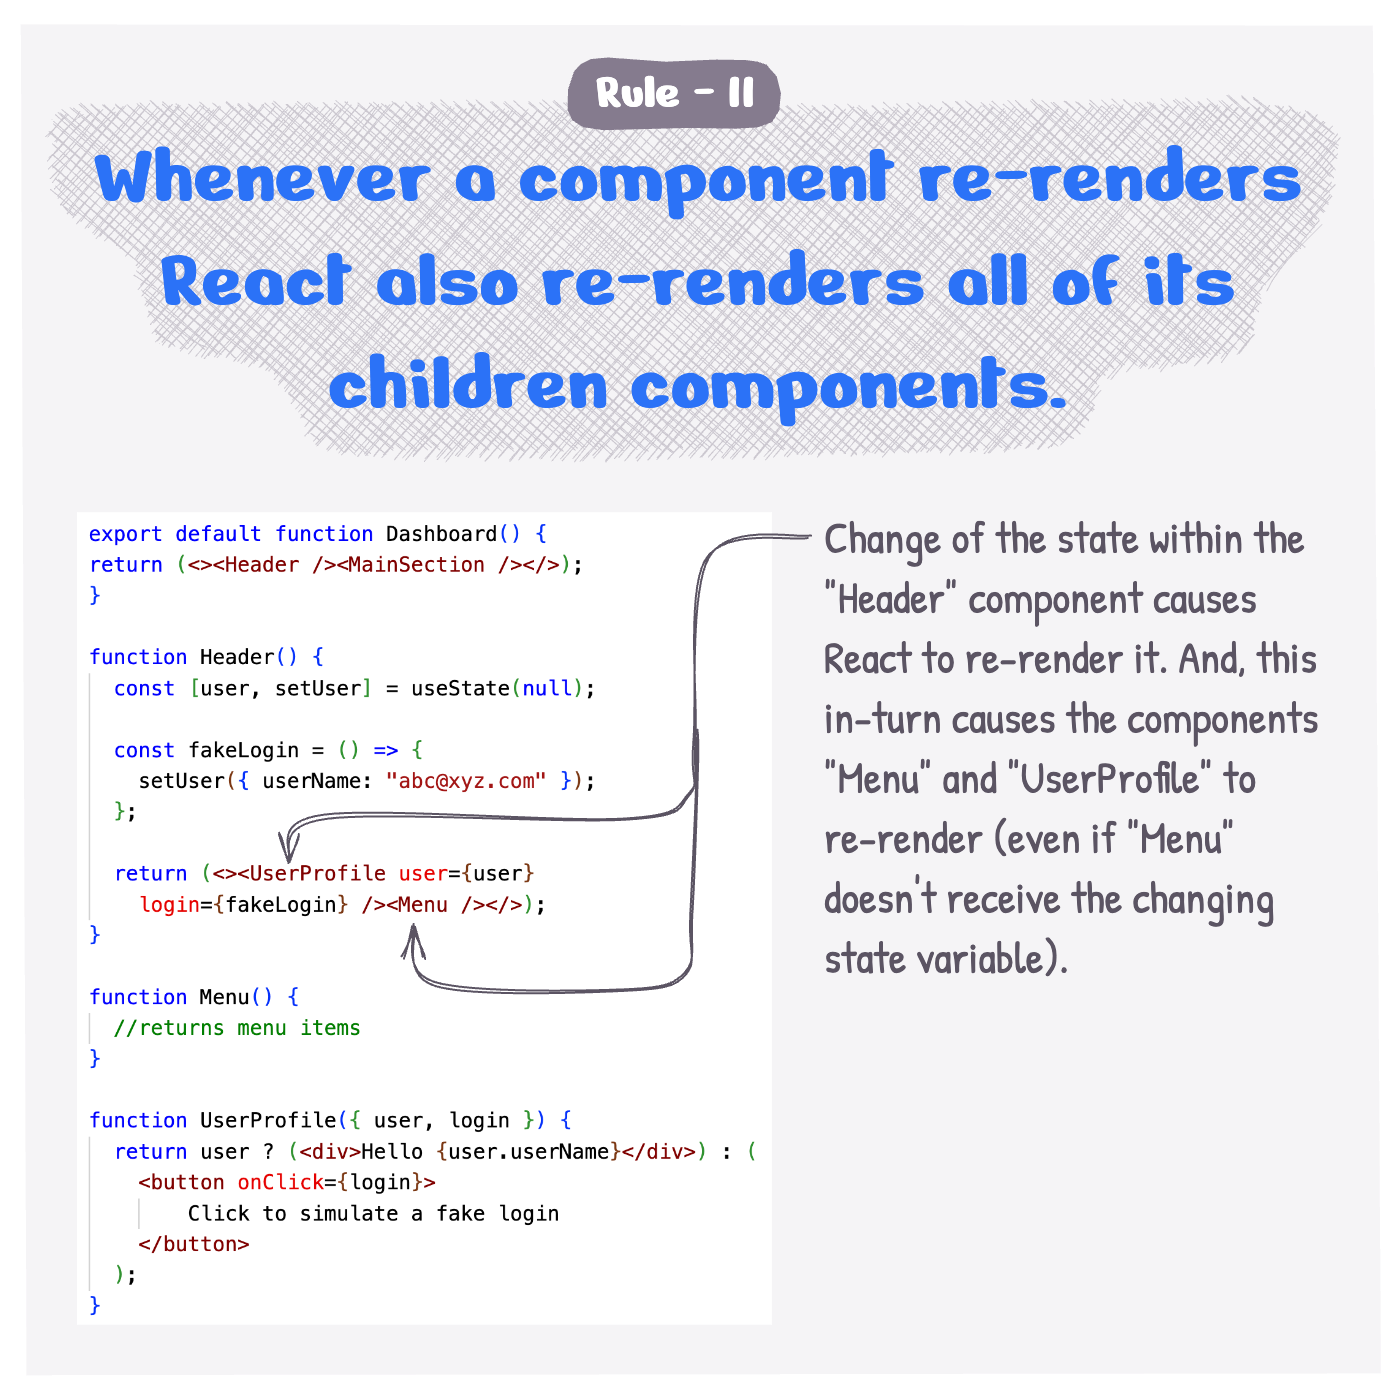 Whenever a component re-renders, React also rerenders all of its children components.